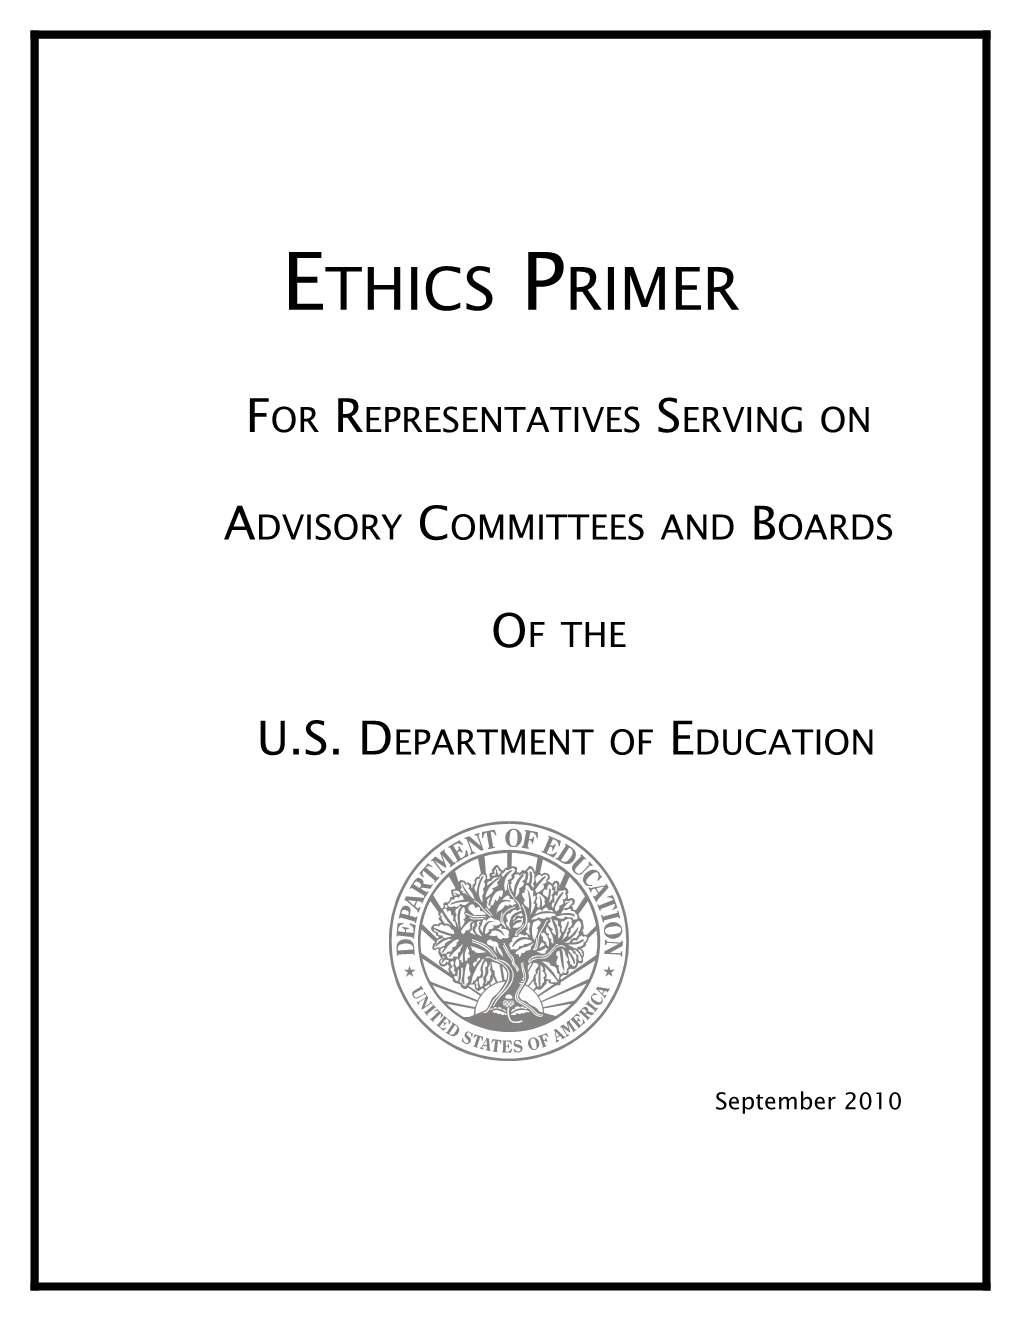 Ethics Primer for Representatives Serving on Advisory Committees and Boards of the U.S